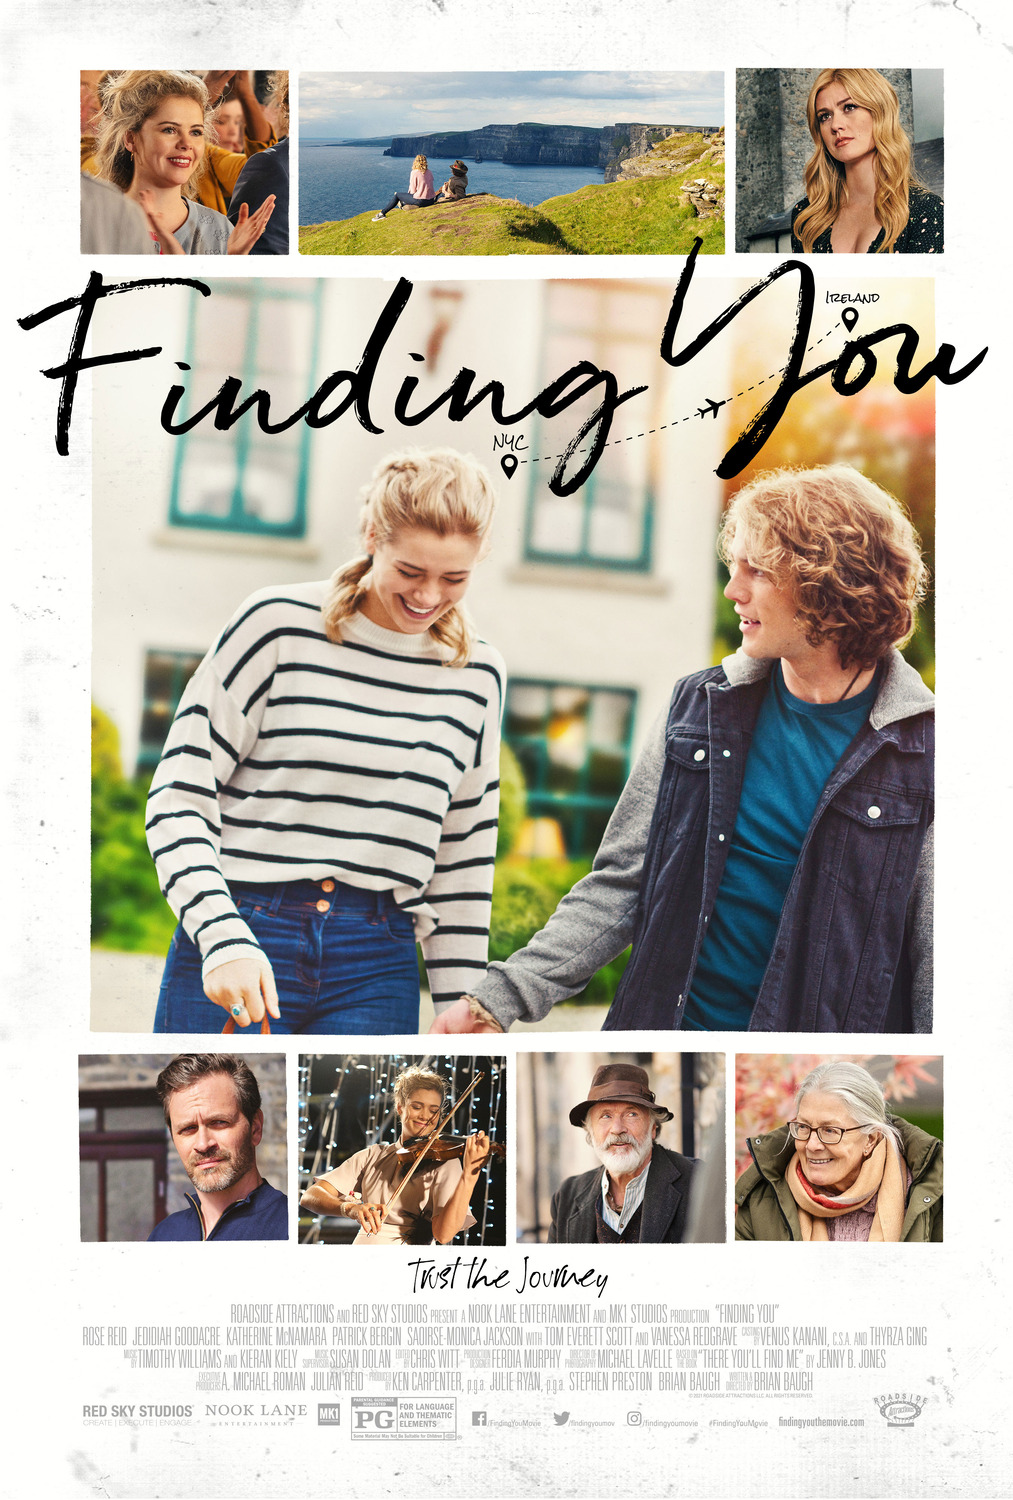 Finding You – 2 Sentence Movie Review.  Entertaining enough cliché chick flick. Other recent films are so bad they make this one look like an Oscar contender.